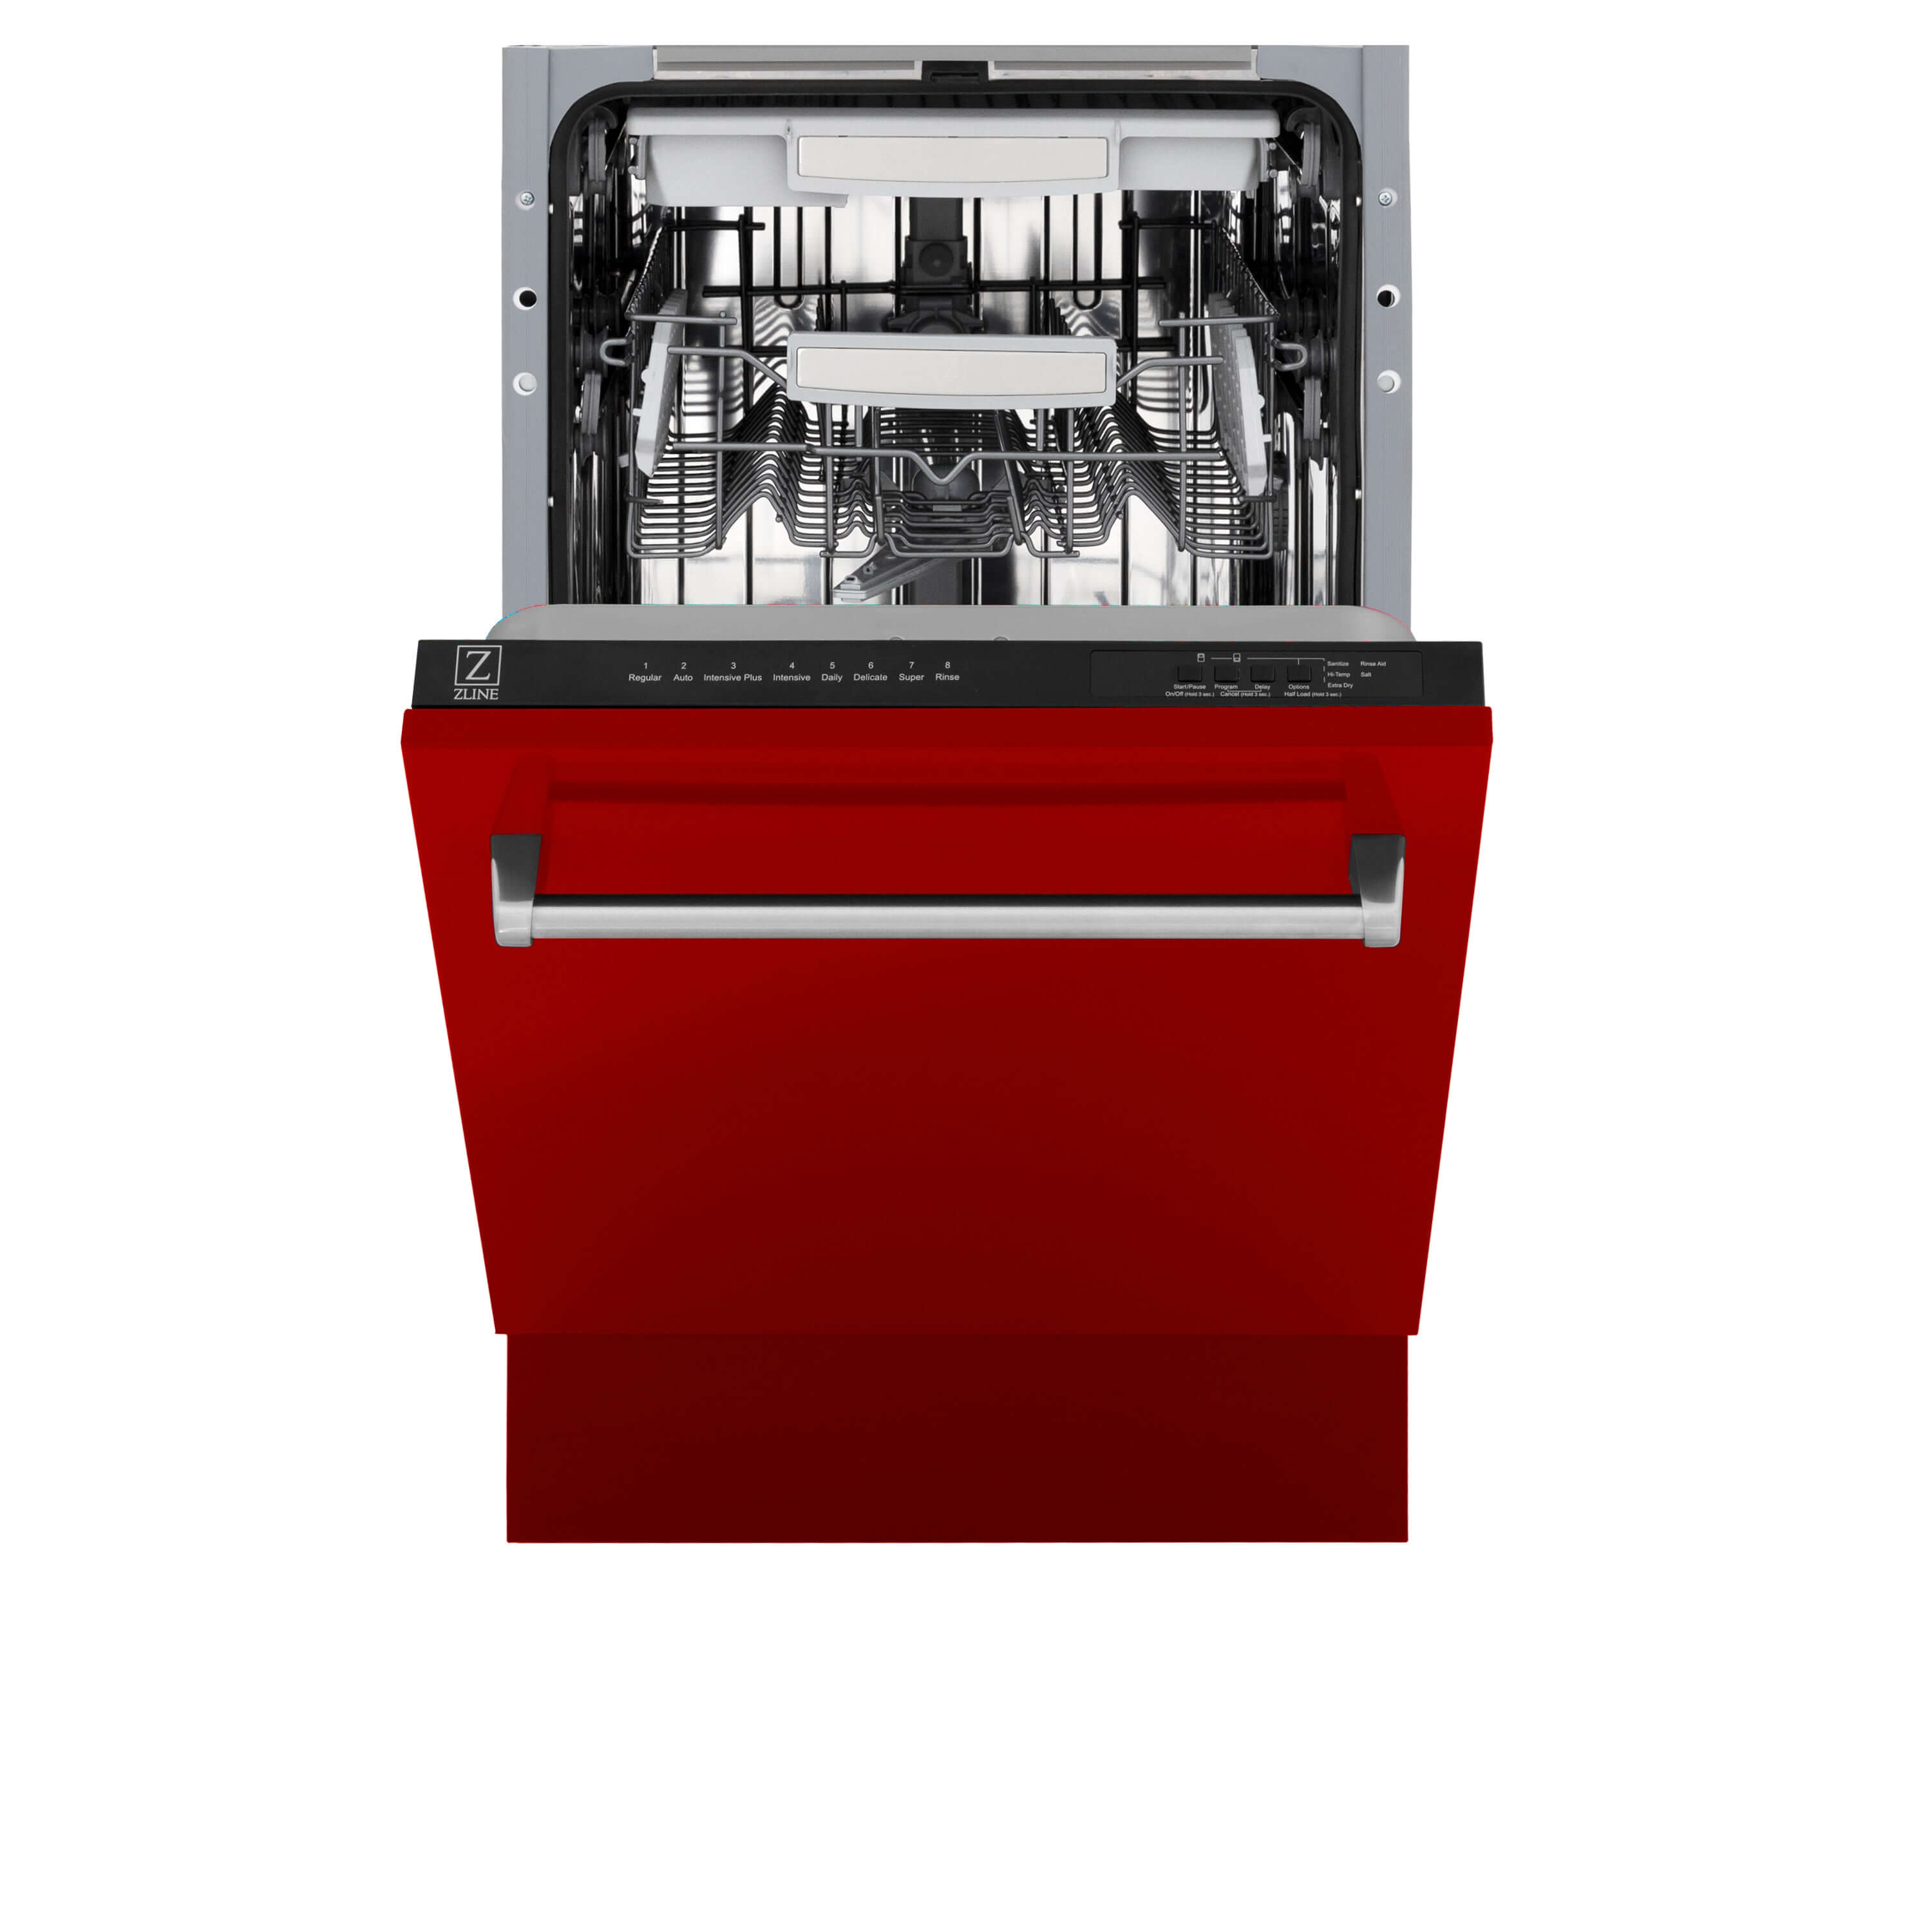 ZLINE 18 in. Tallac Series 3rd Rack Top Control Built-In Dishwasher in Red Gloss with Stainless Steel Tub, 51dBa (DWV-RG-18) front, half open.